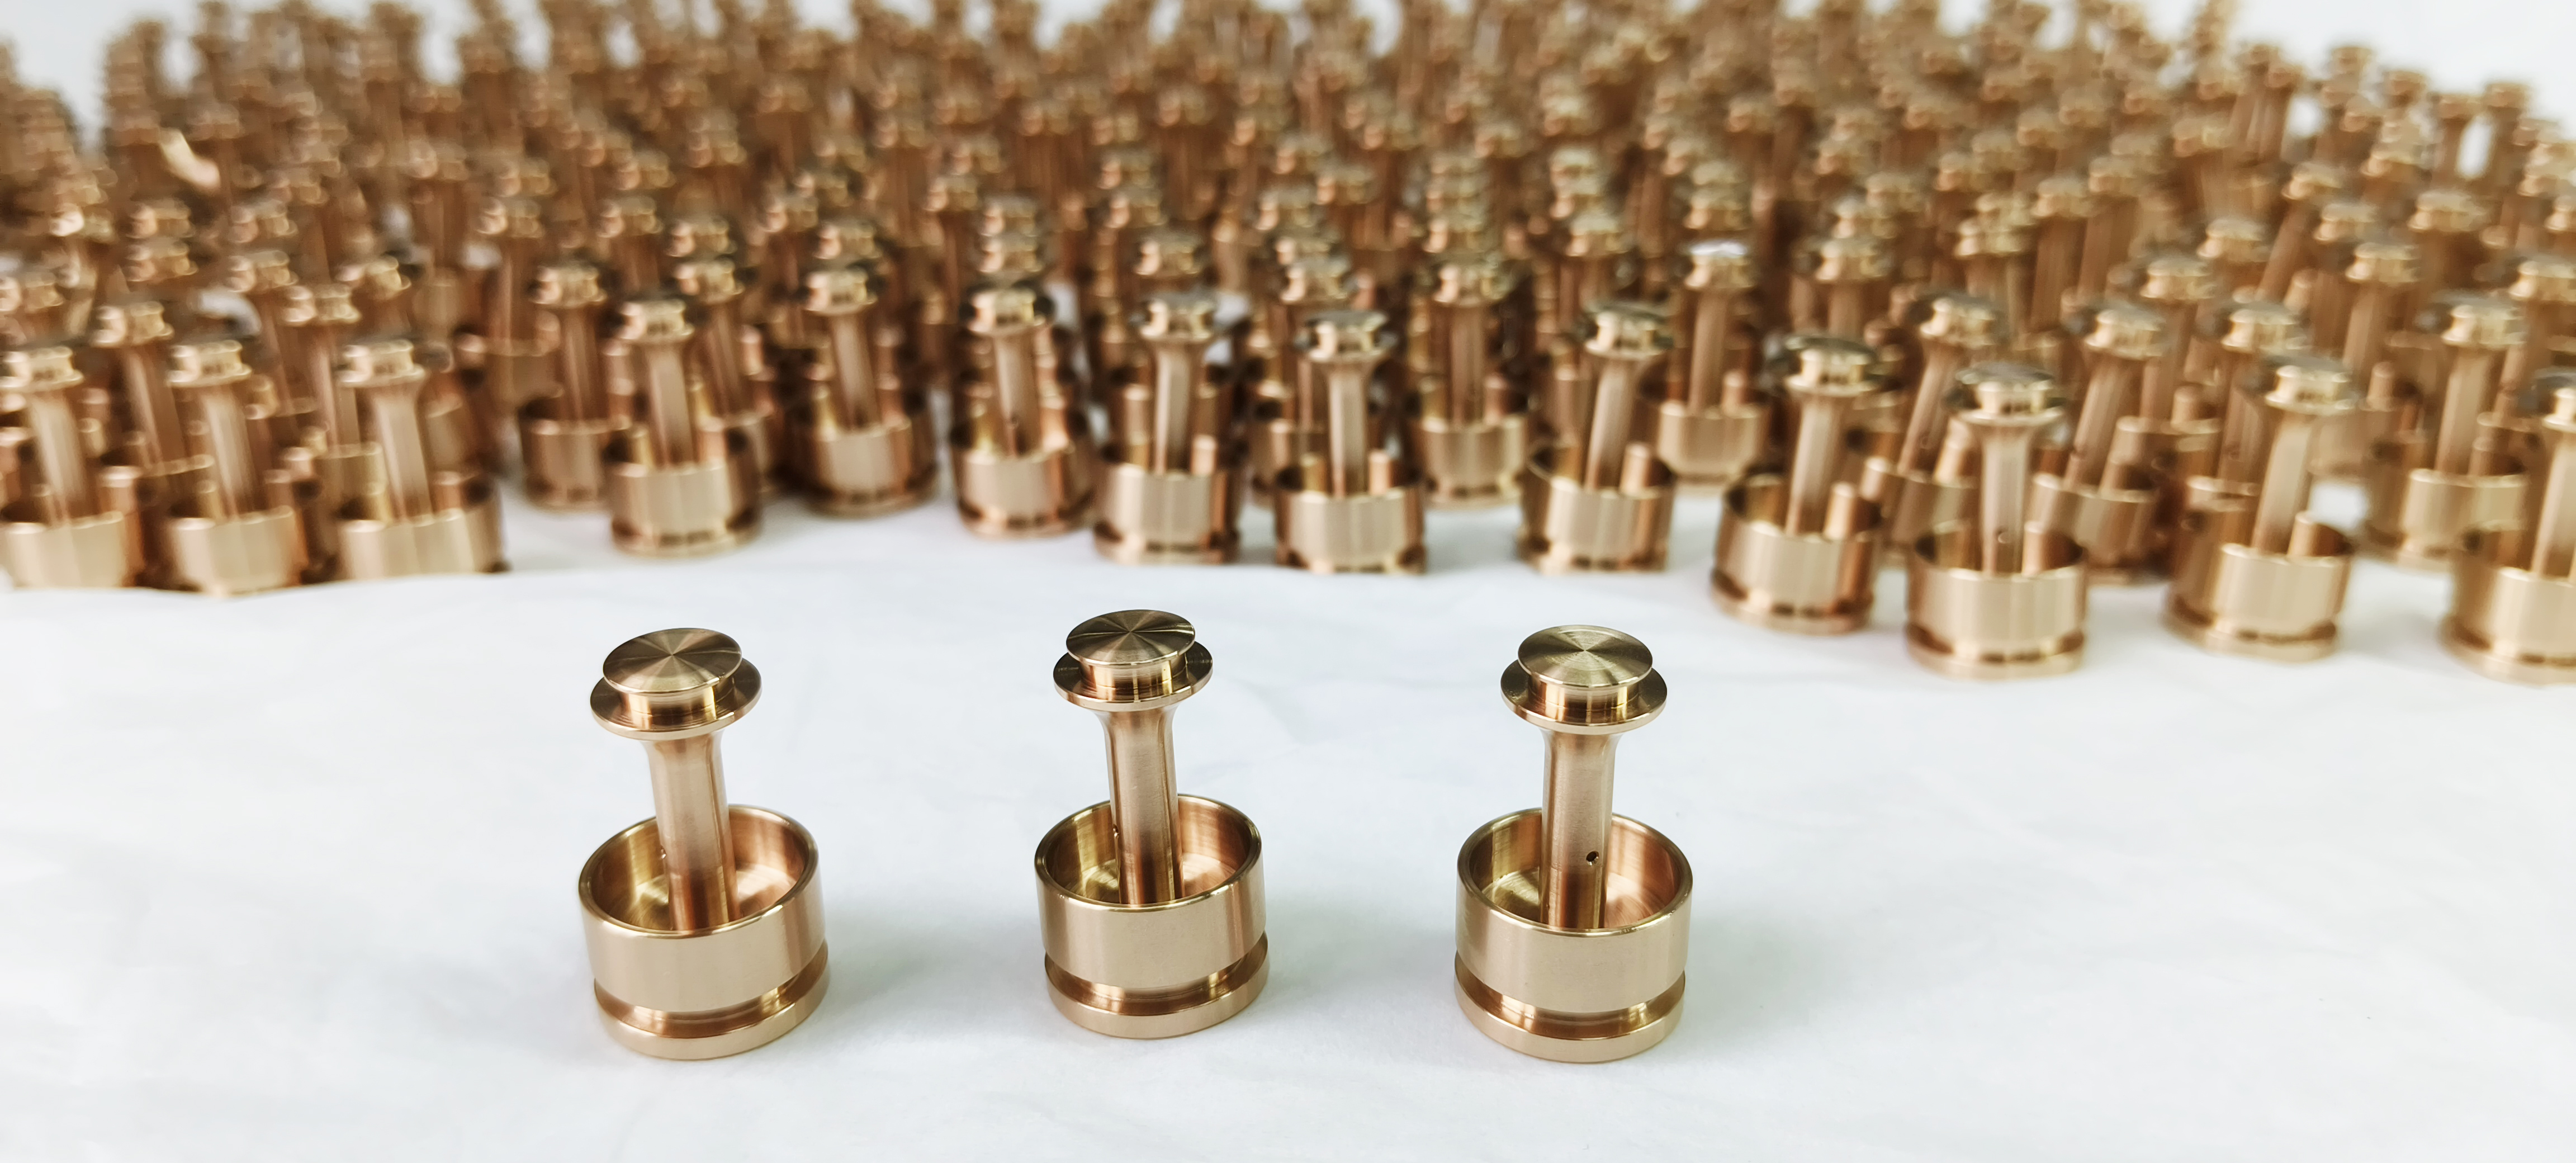 How To Choose The Surface Treatment After CNC Machining The Copper Parts